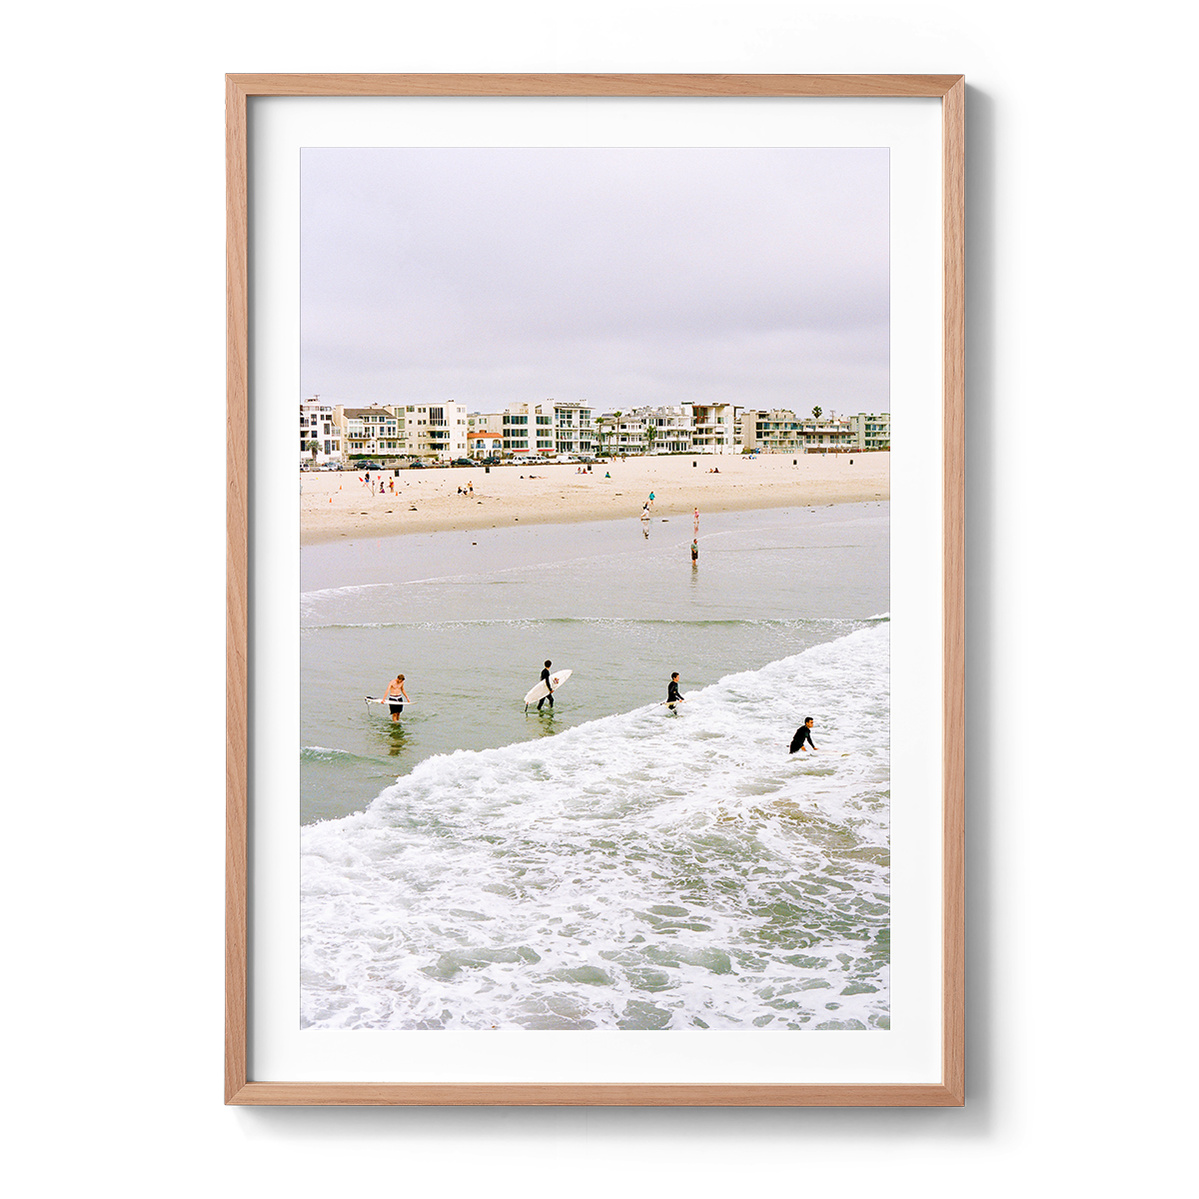 Surfers in Venice Beach. Fine art print framed and ready to hang with natural timber frame.